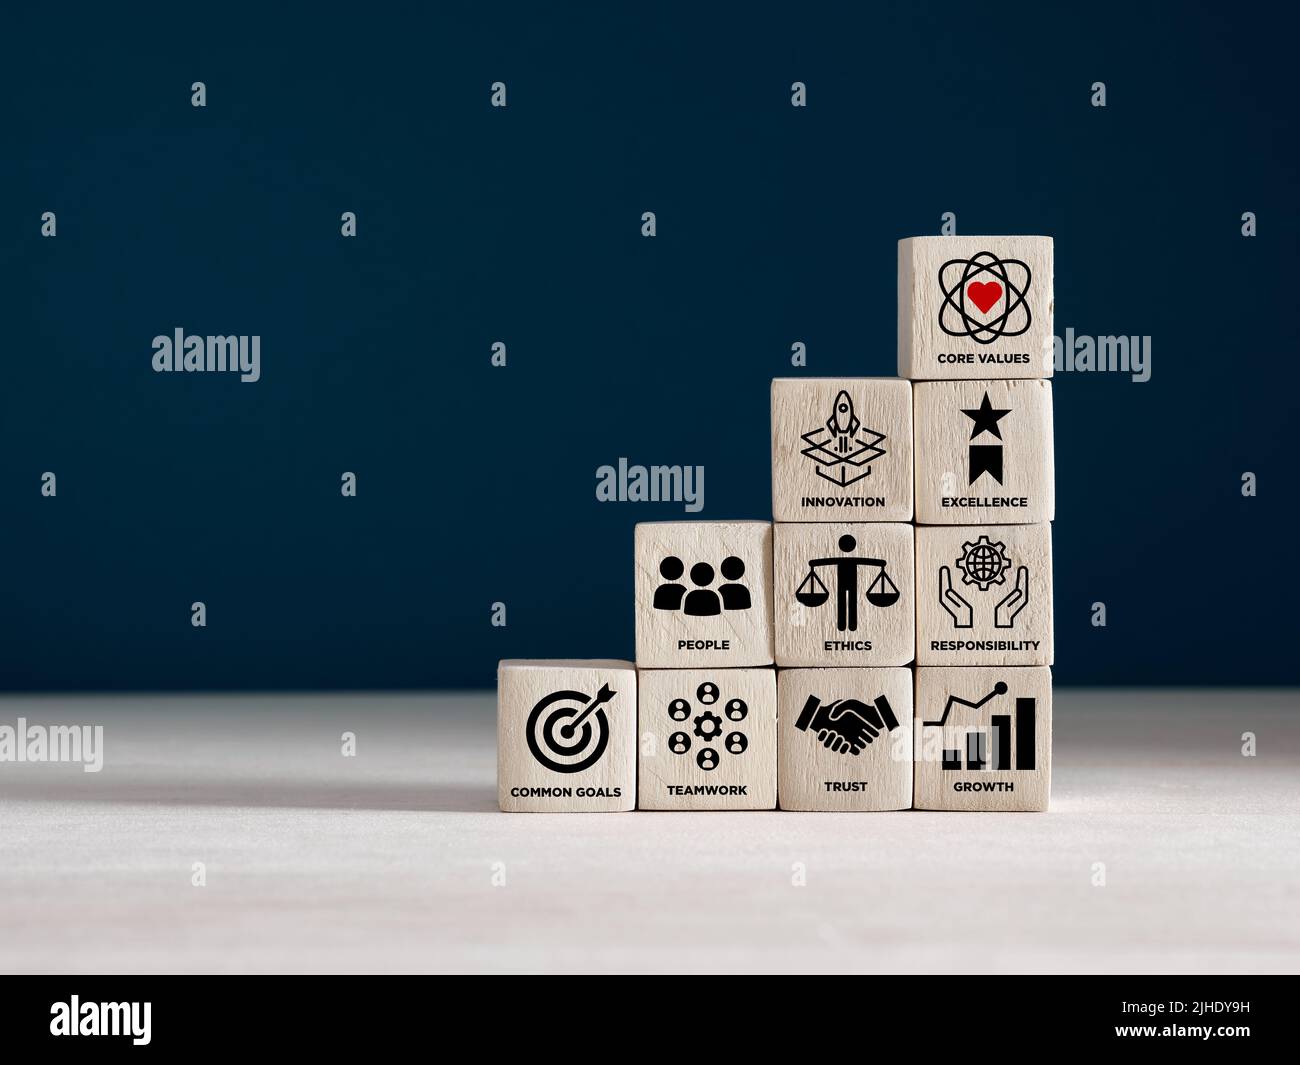 Wooden cubes with core corporate values for goal achievement and business success. Company culture, guiding principles and business strategy concept. Stock Photo